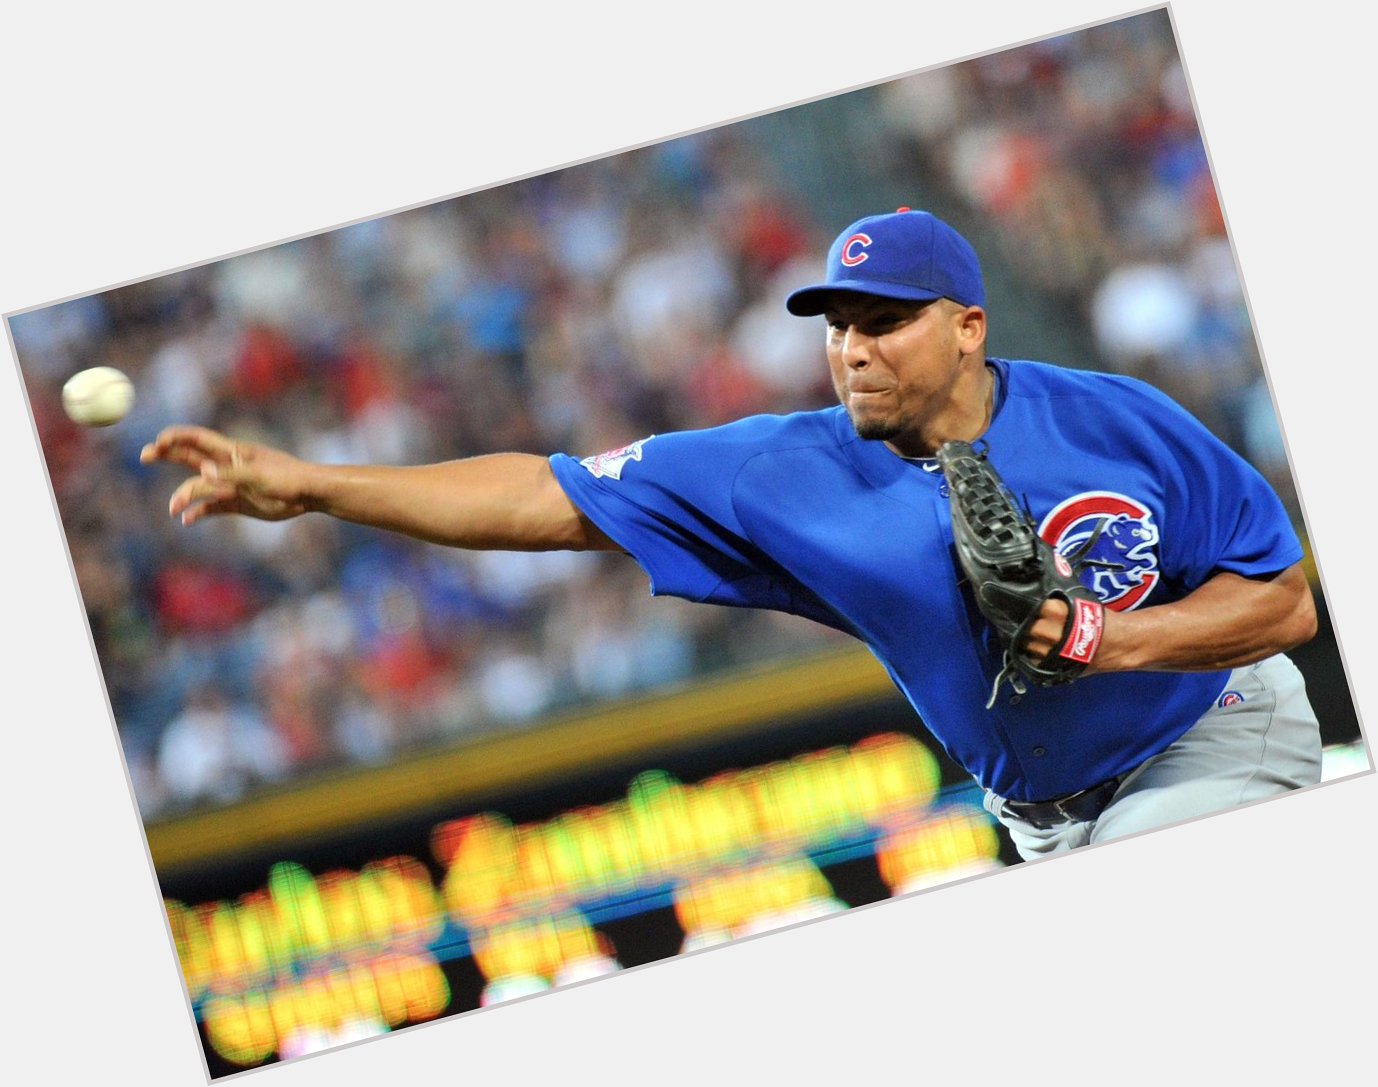 Happy birthday to Carlos Zambrano, the former Cubs ace who is looking to make a comeback.

Why not? 